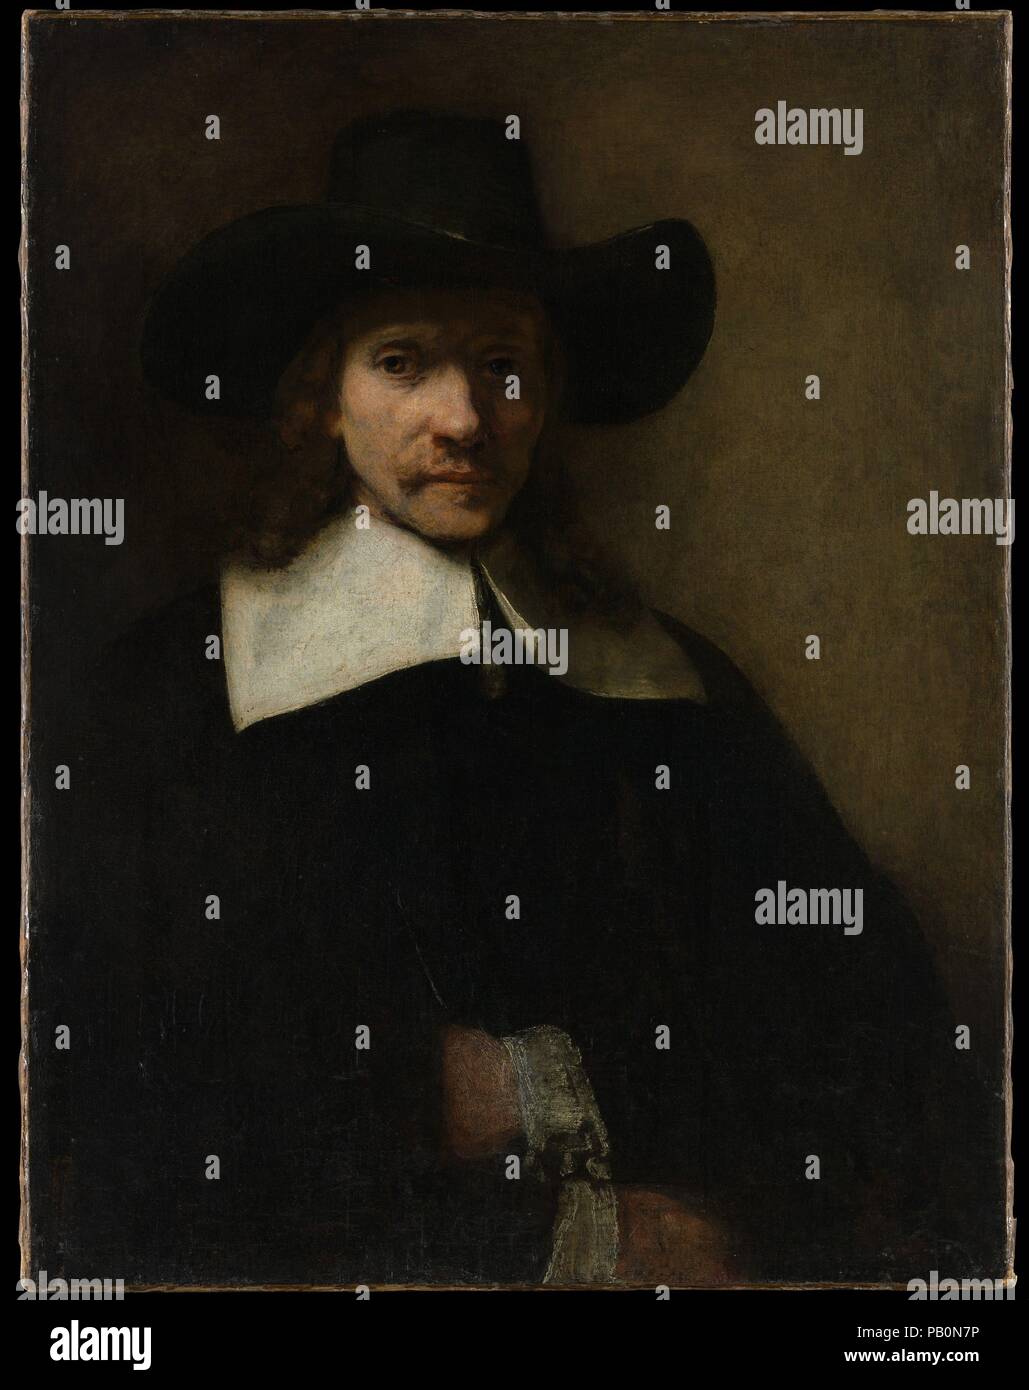 Portrait of a Man. Artist: Rembrandt (Rembrandt van Rijn) (Dutch, Leiden 1606-1669 Amsterdam). Dimensions: 32 7/8 x 25 3/8 in. (83.5 x 64.5 cm). Date: ca. 1655-60.  This portrait is generally considered to be by Rembrandt, and is somewhat less uniformly thought to date from the 1650s. Both questions are made more difficult by the condition of the picture: the hands, the body, and the hat are badly abraded. The face is fairly well preserved. Museum: Metropolitan Museum of Art, New York, USA. Stock Photo